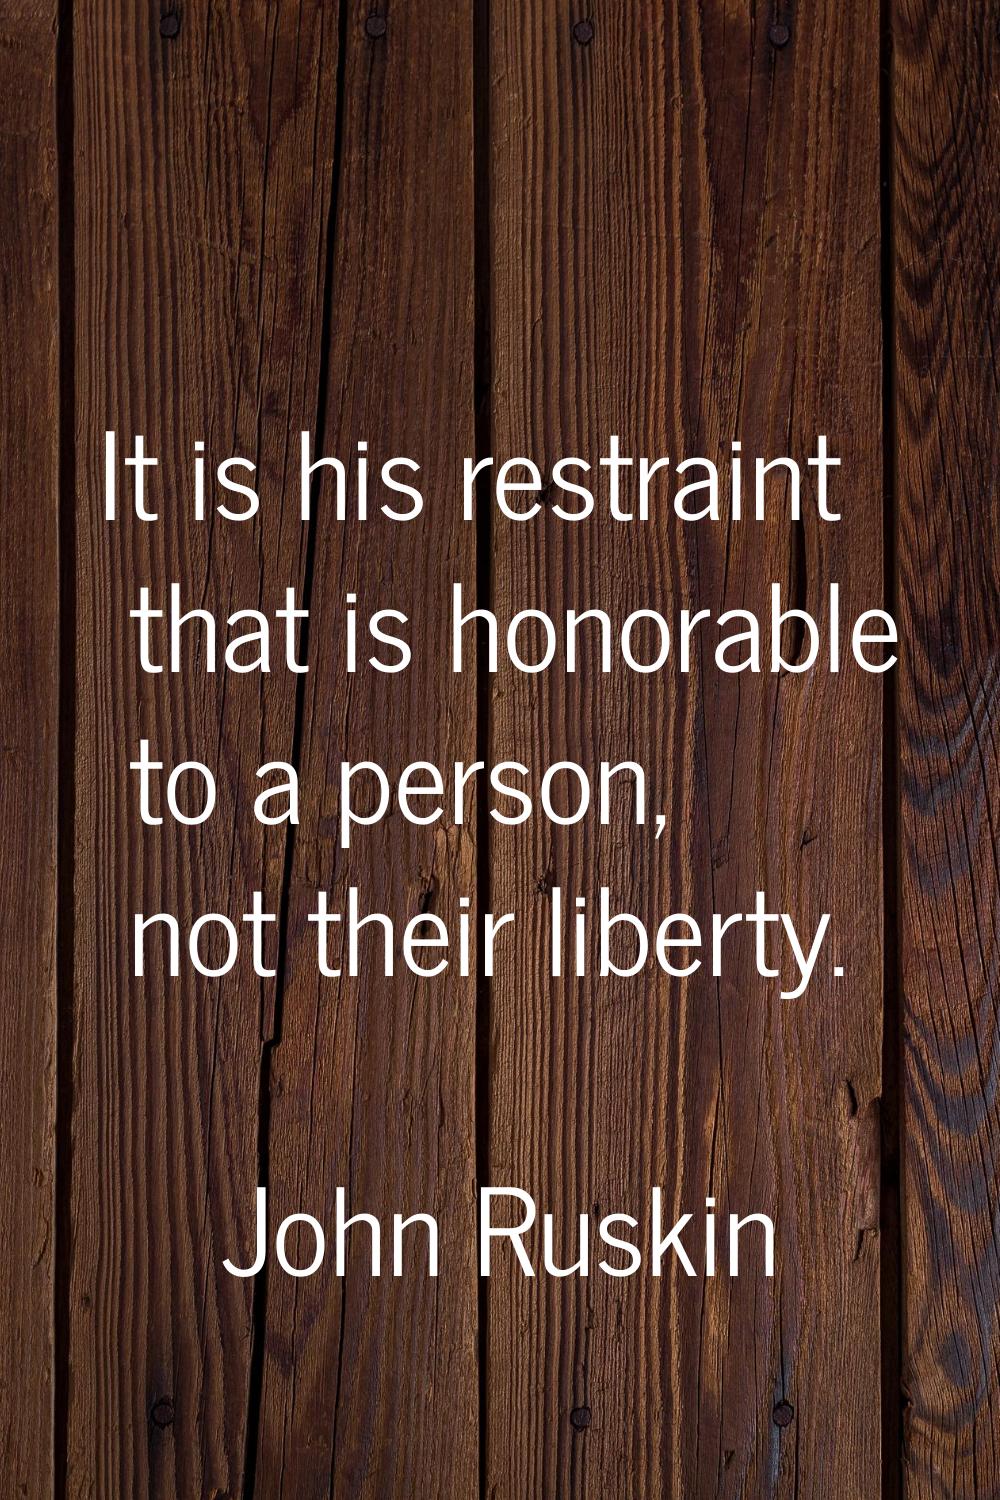 It is his restraint that is honorable to a person, not their liberty.